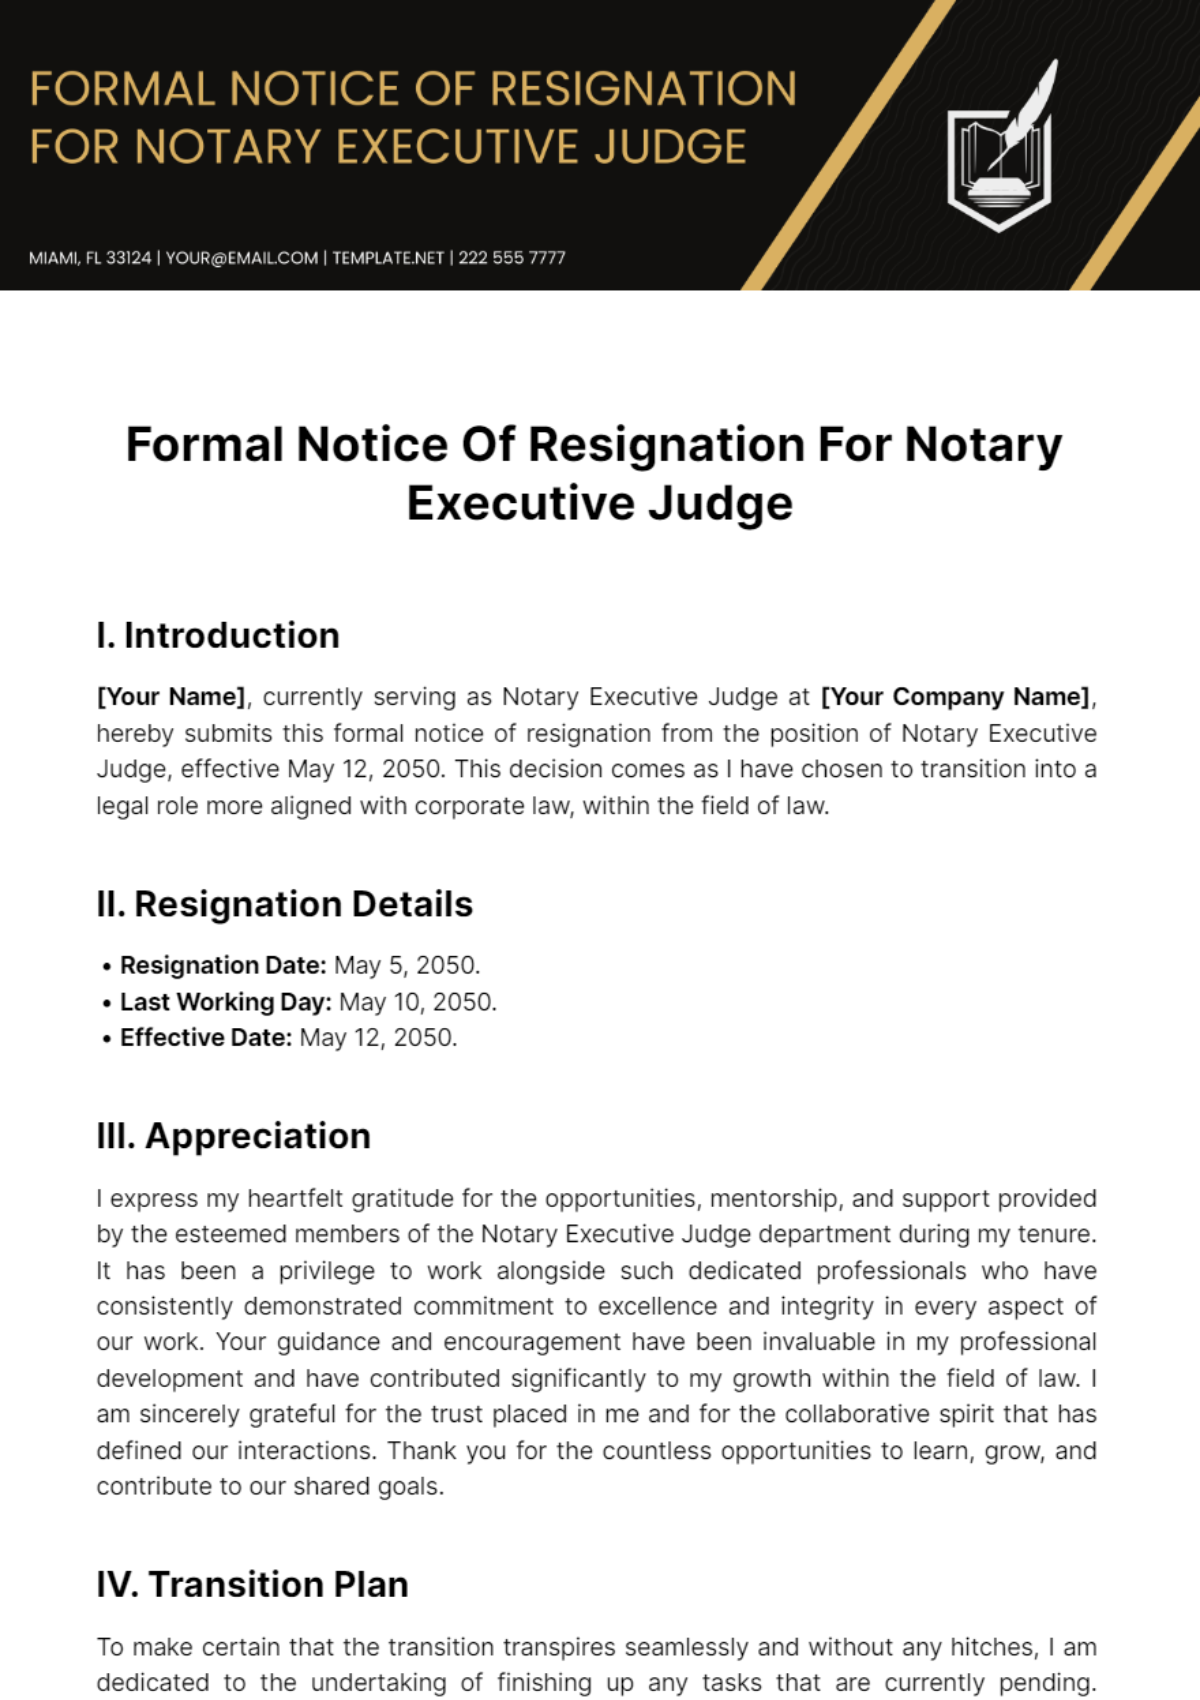 Formal Notice Of Resignation For Notary Executive Judge Template